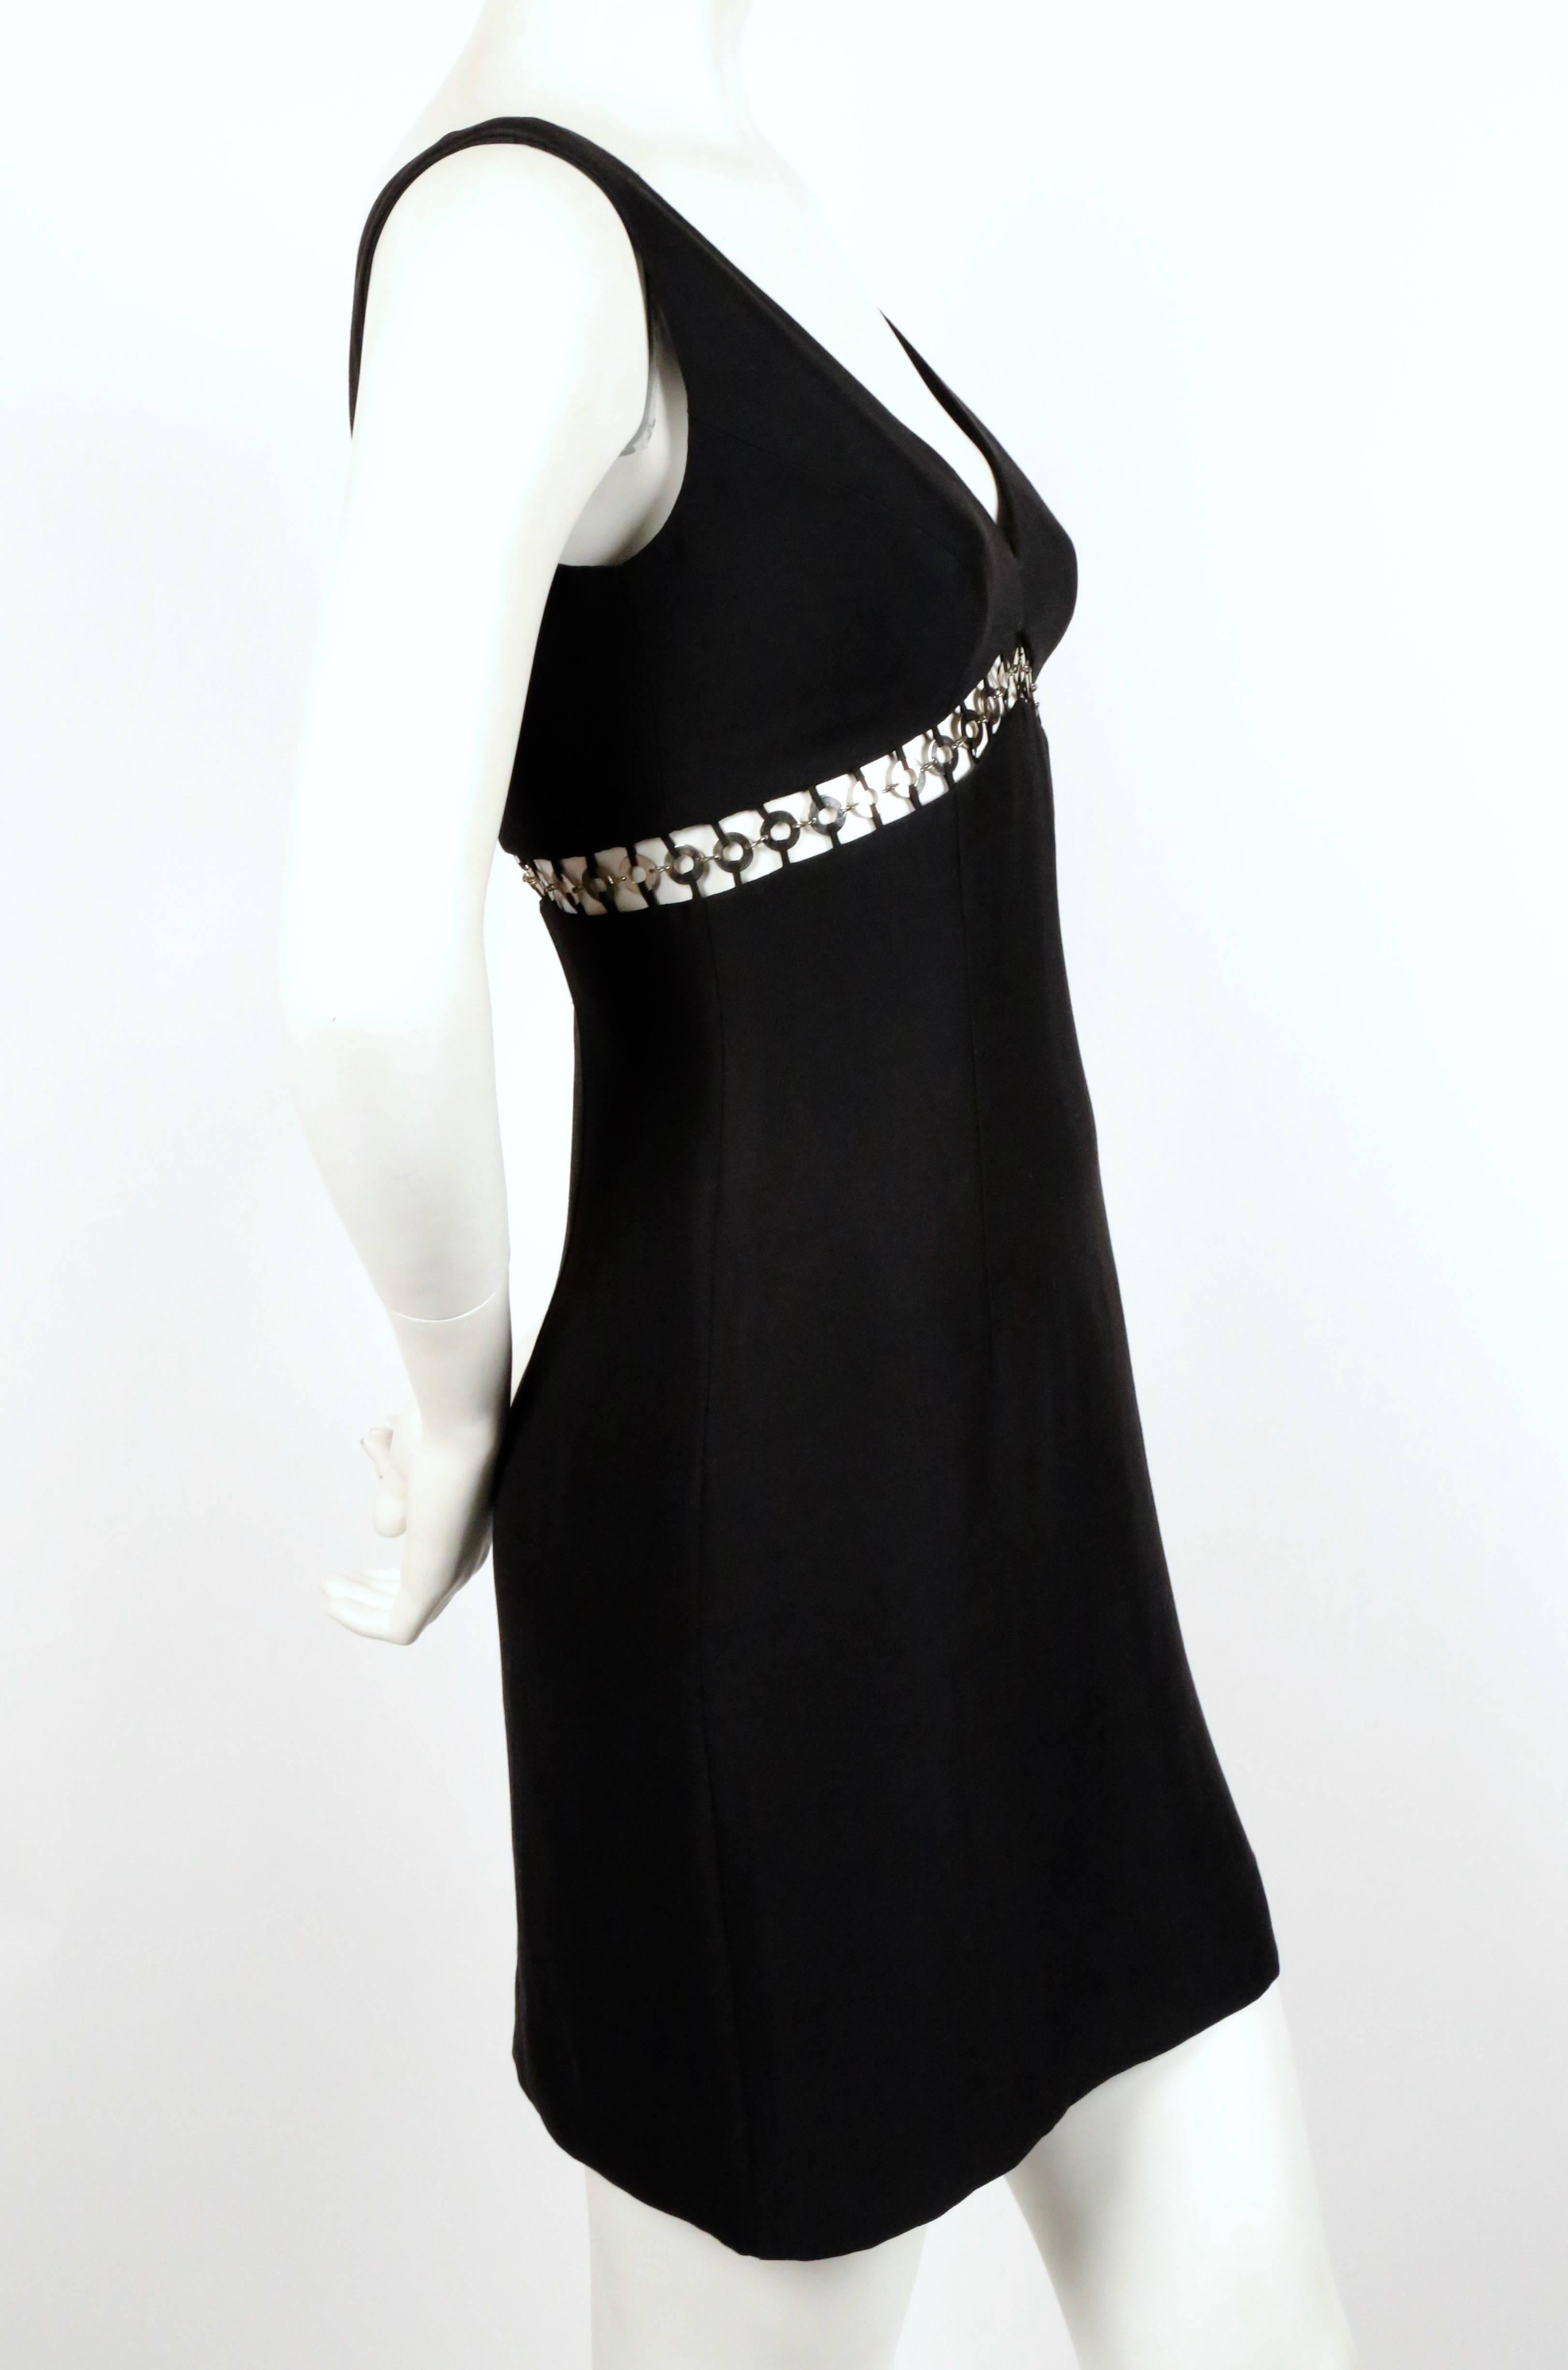 Jet black mini dress with cut out and silver metallic rings from Sophie Sitbon dating to the 1990's. Best fits a US 2. Approximate measurements: bust 32